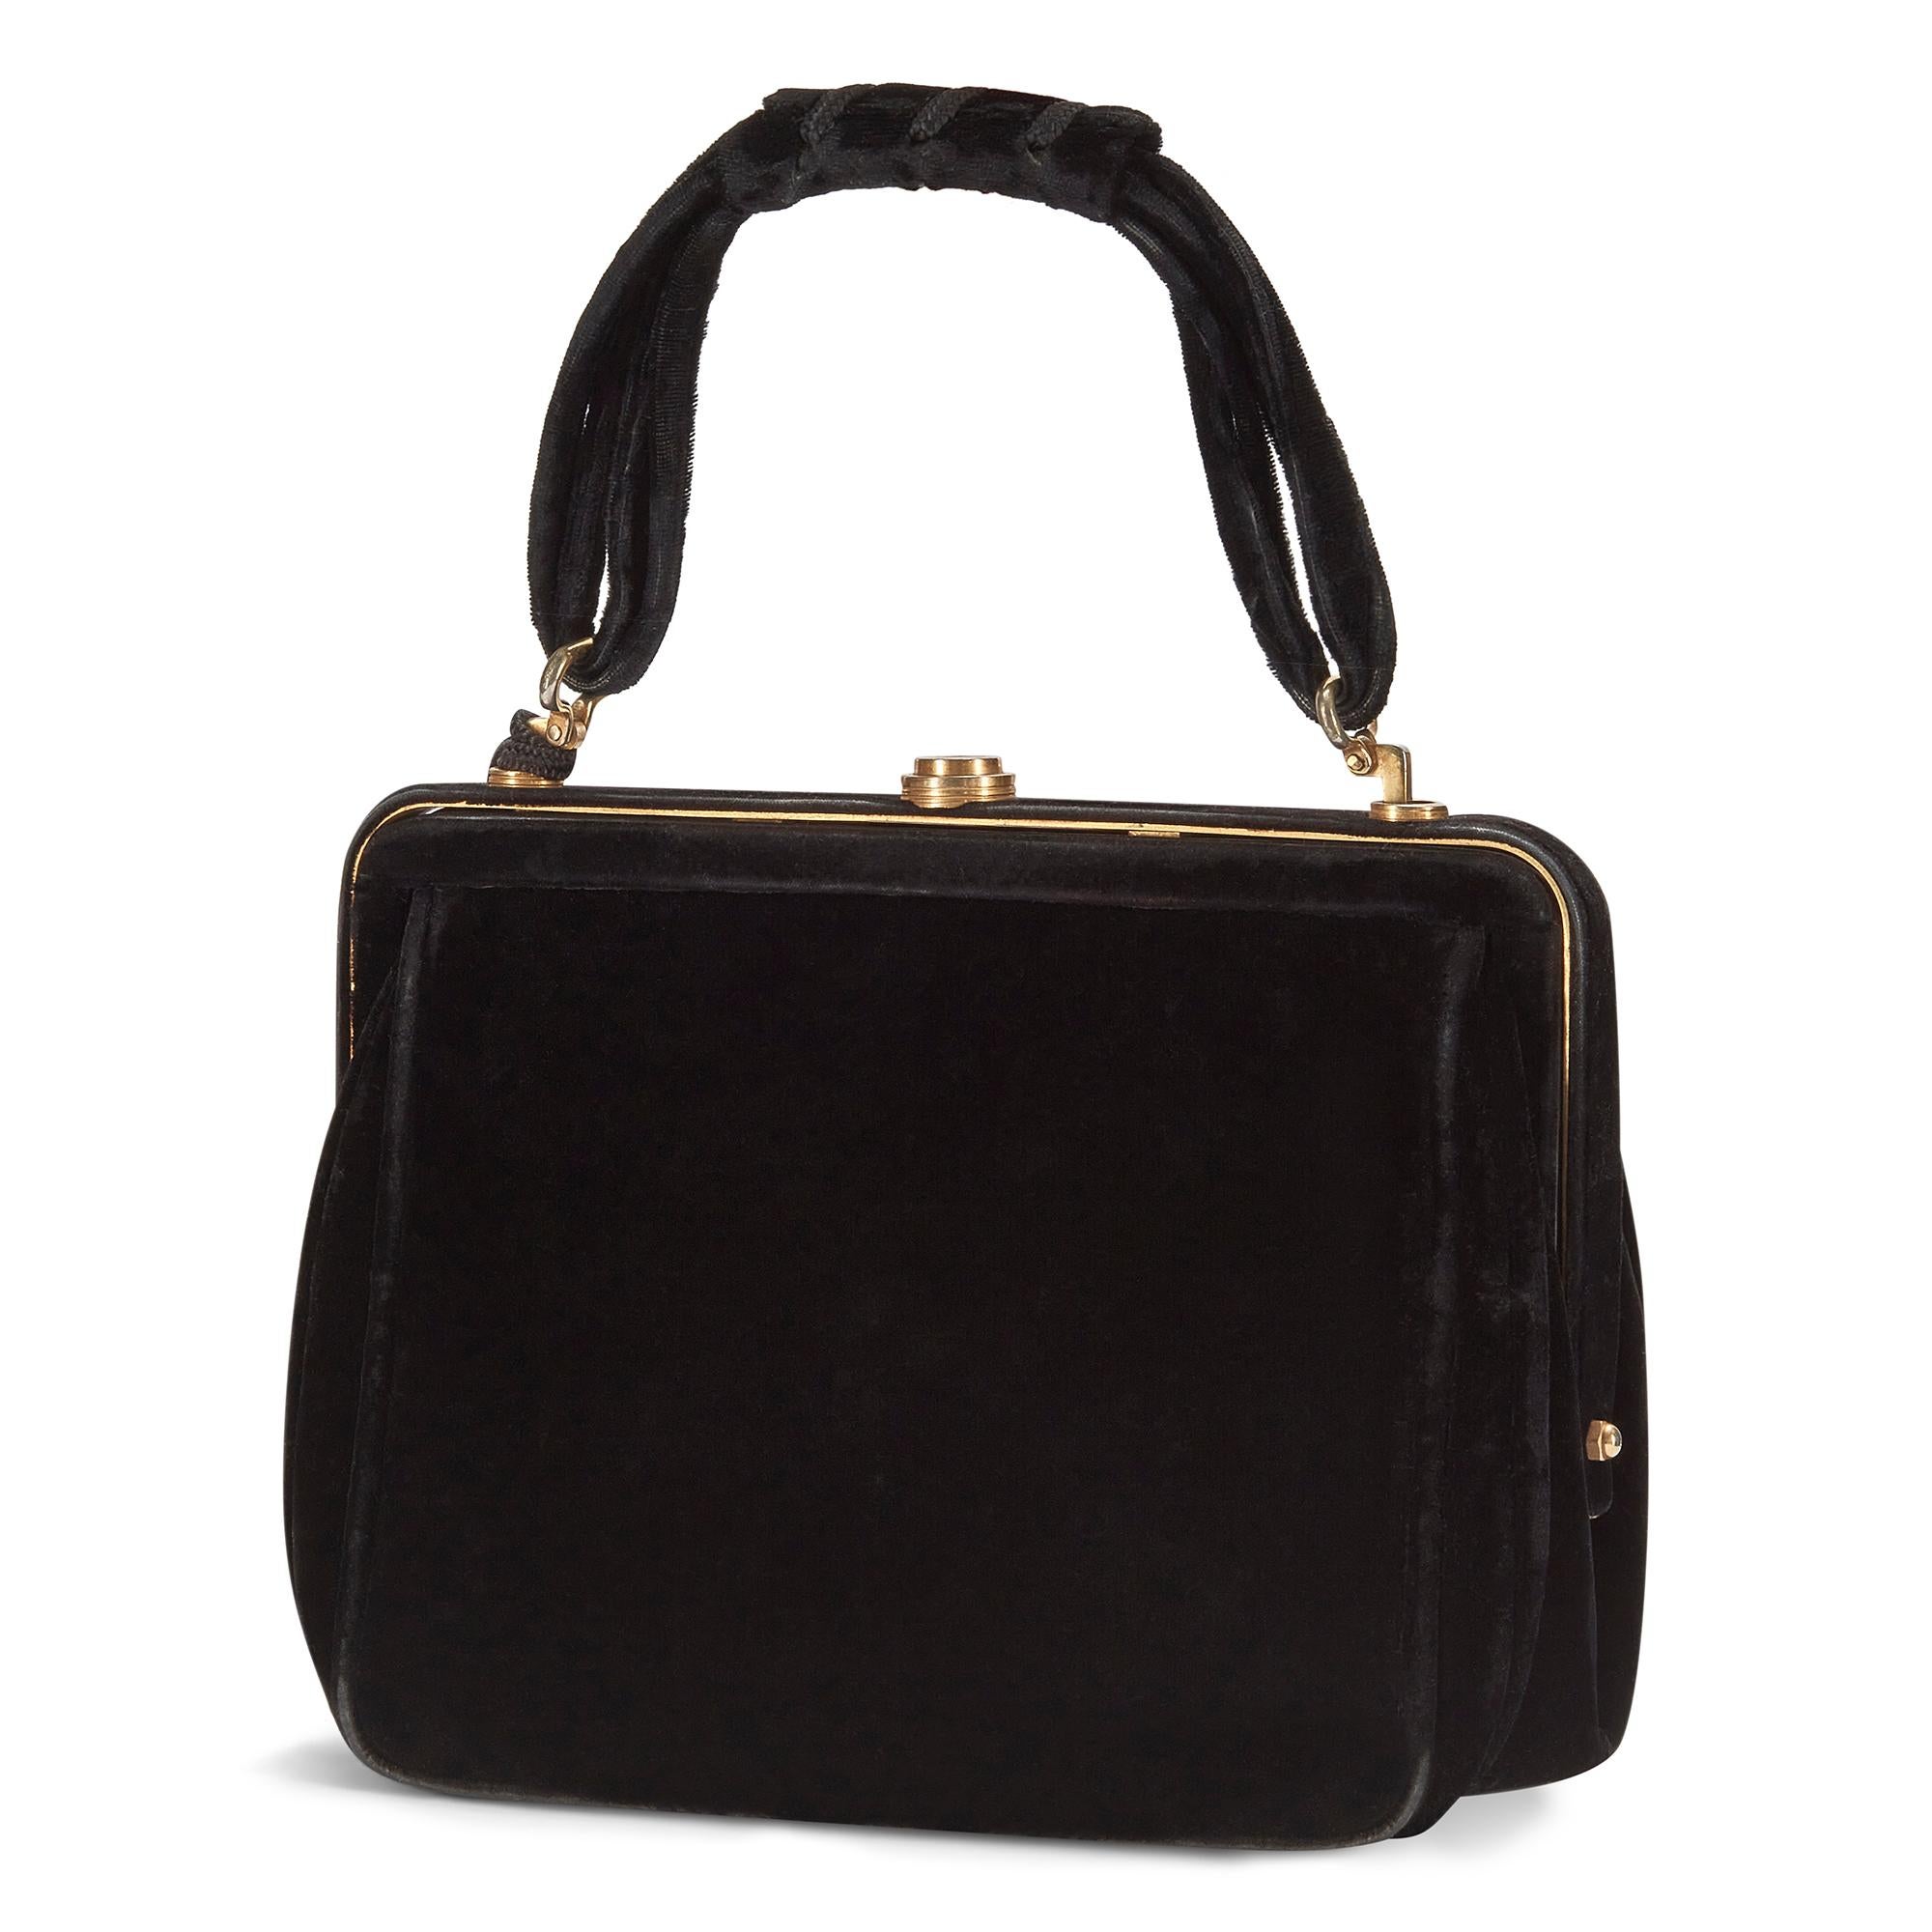 A very fine black Soprarizzo velvet and brass hardware bag circa late 1940s to early 1950s.  With exquisite craftsmanship and materials, it was almost certainly made in Venice and is possibly a very early example by Roberto di Camerino or Cesare